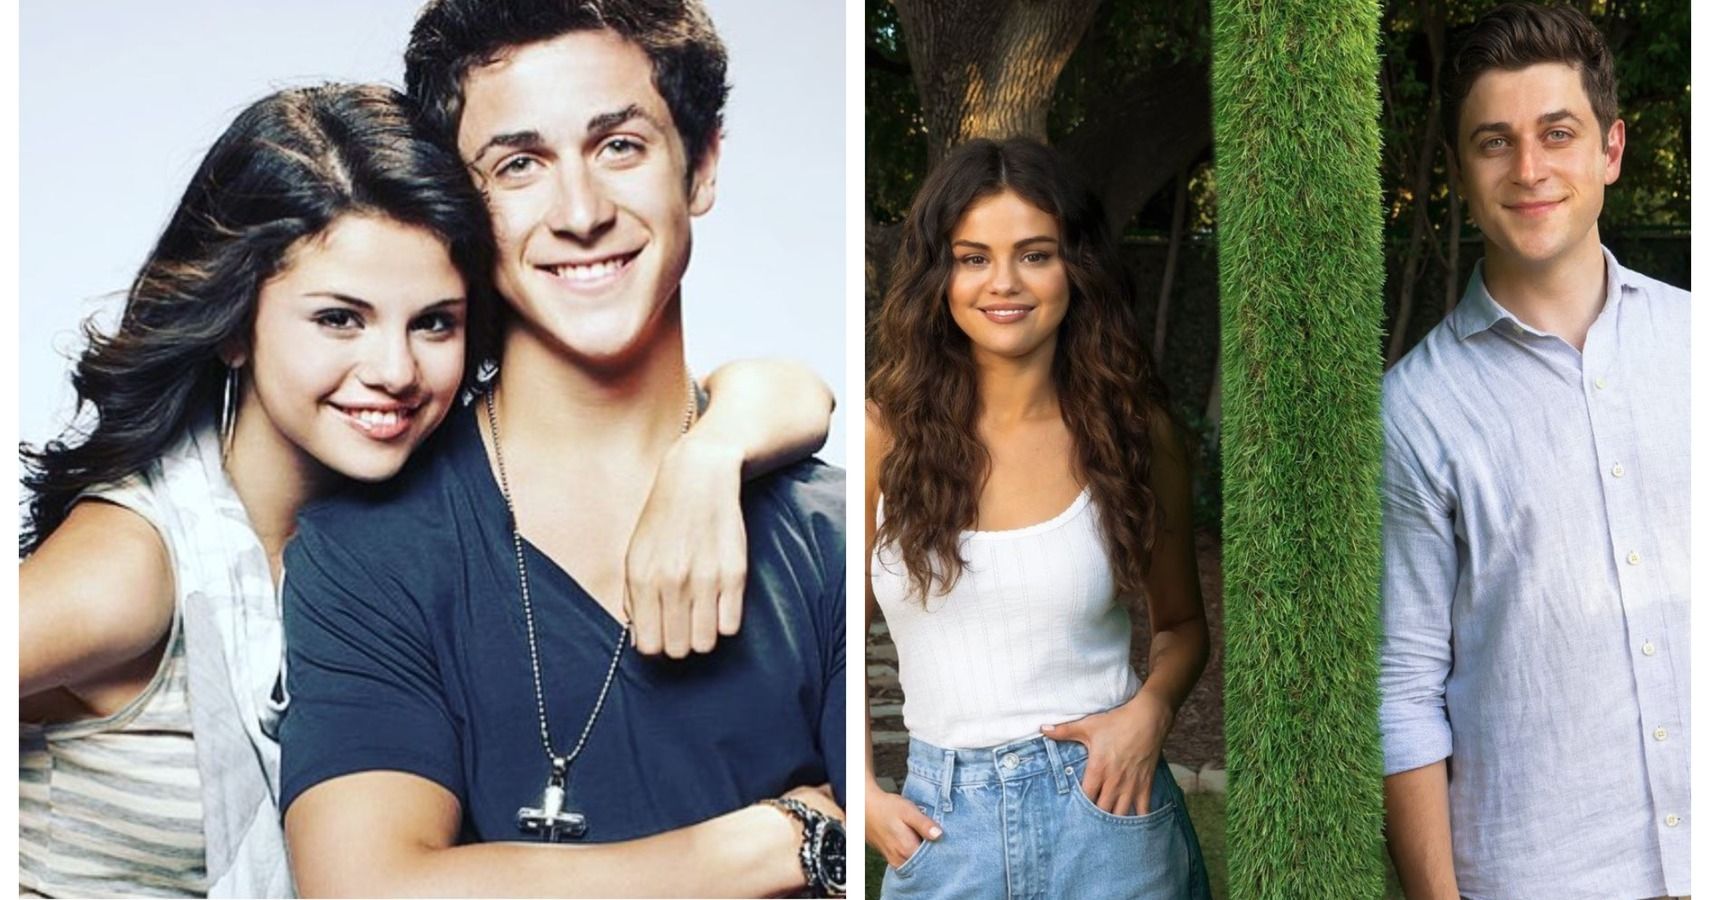 Wizards Of Waverly Place: Where Is The Cast Now? 